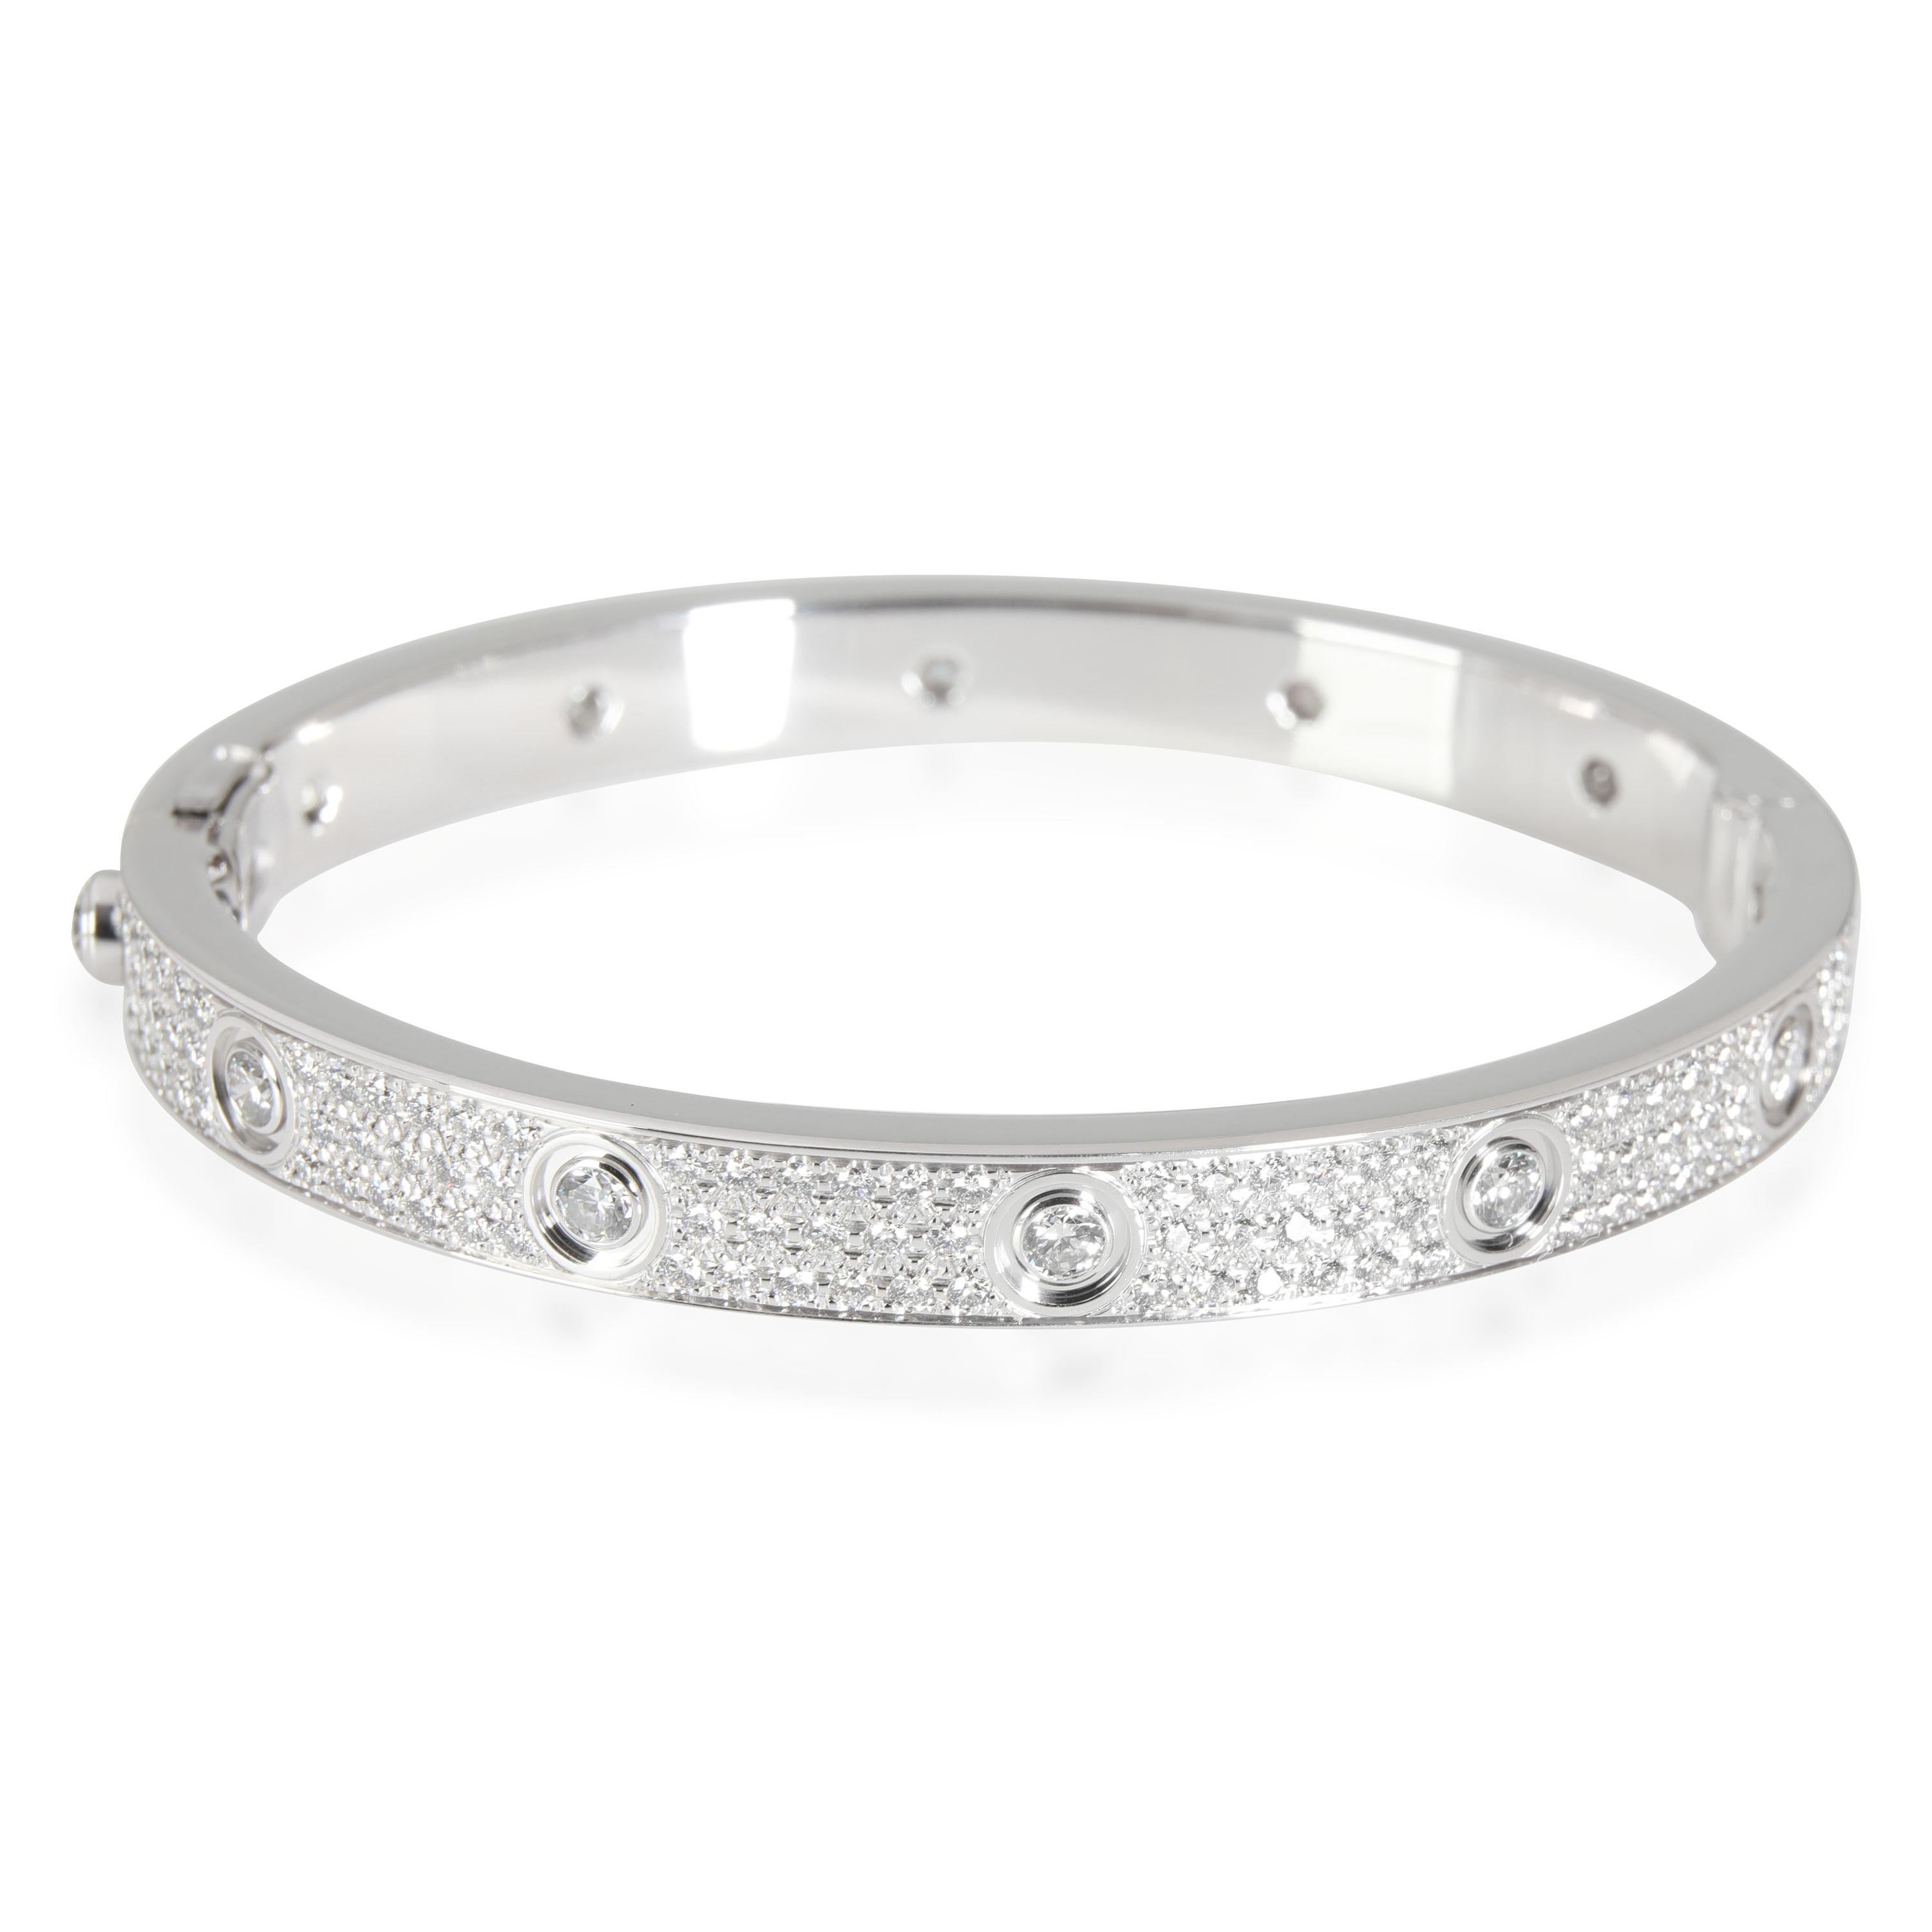 Cartier LOVE Diamond Bracelet in 18K White Gold 3.15 CTW

PRIMARY DETAILS
SKU: 115123
Listing Title: Cartier LOVE Diamond Bracelet in 18K White Gold 3.15 CTW
Condition Description: Retails for 62000 USD. In excellent condition and recently polished.